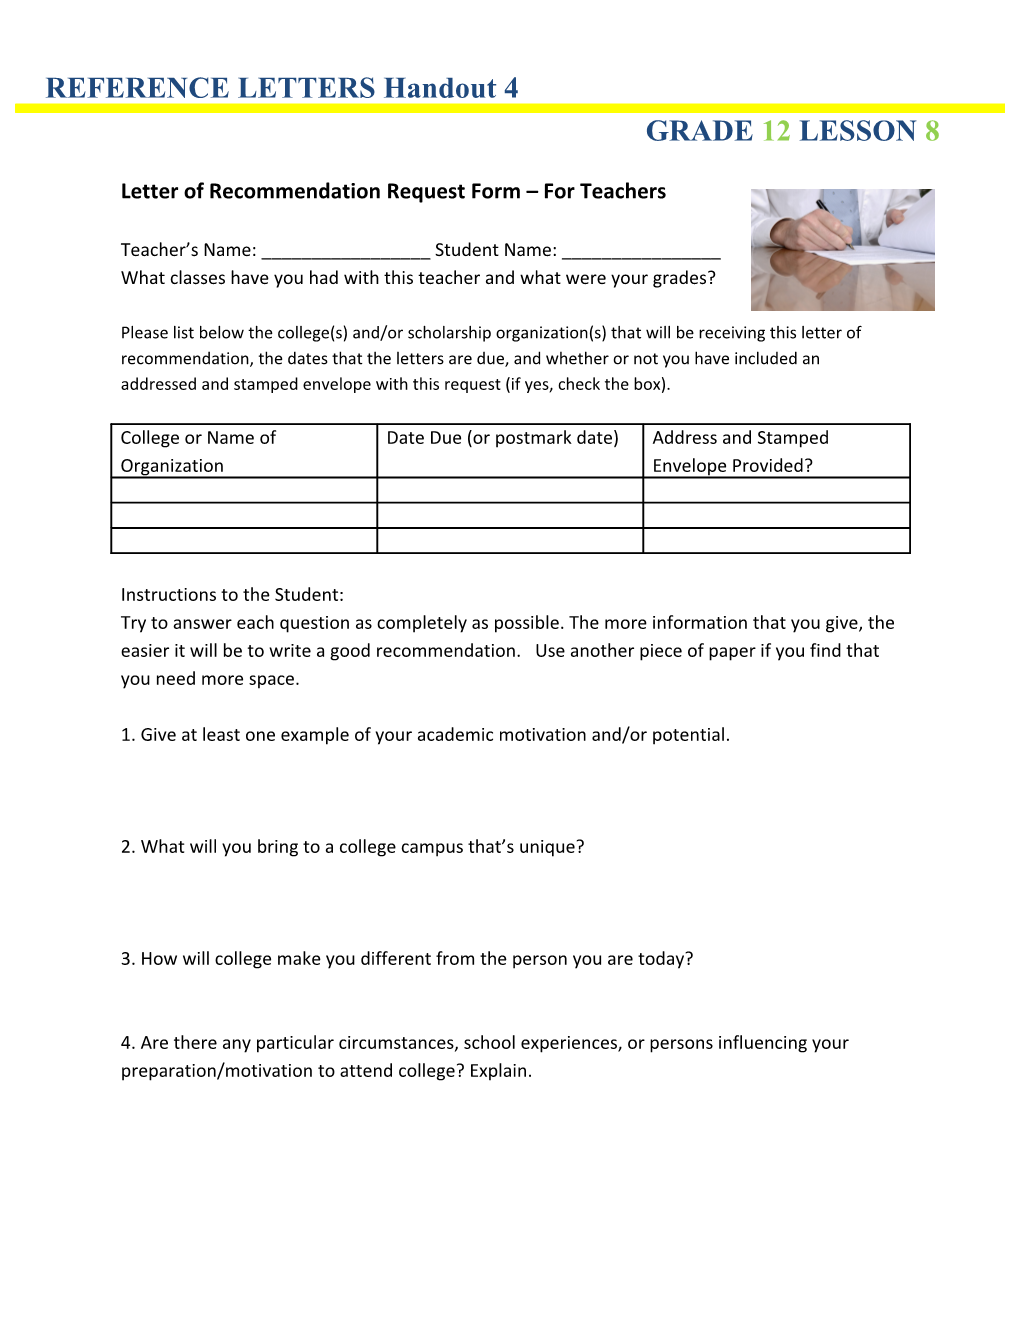 Letter of Recommendation Request Form for Teachers